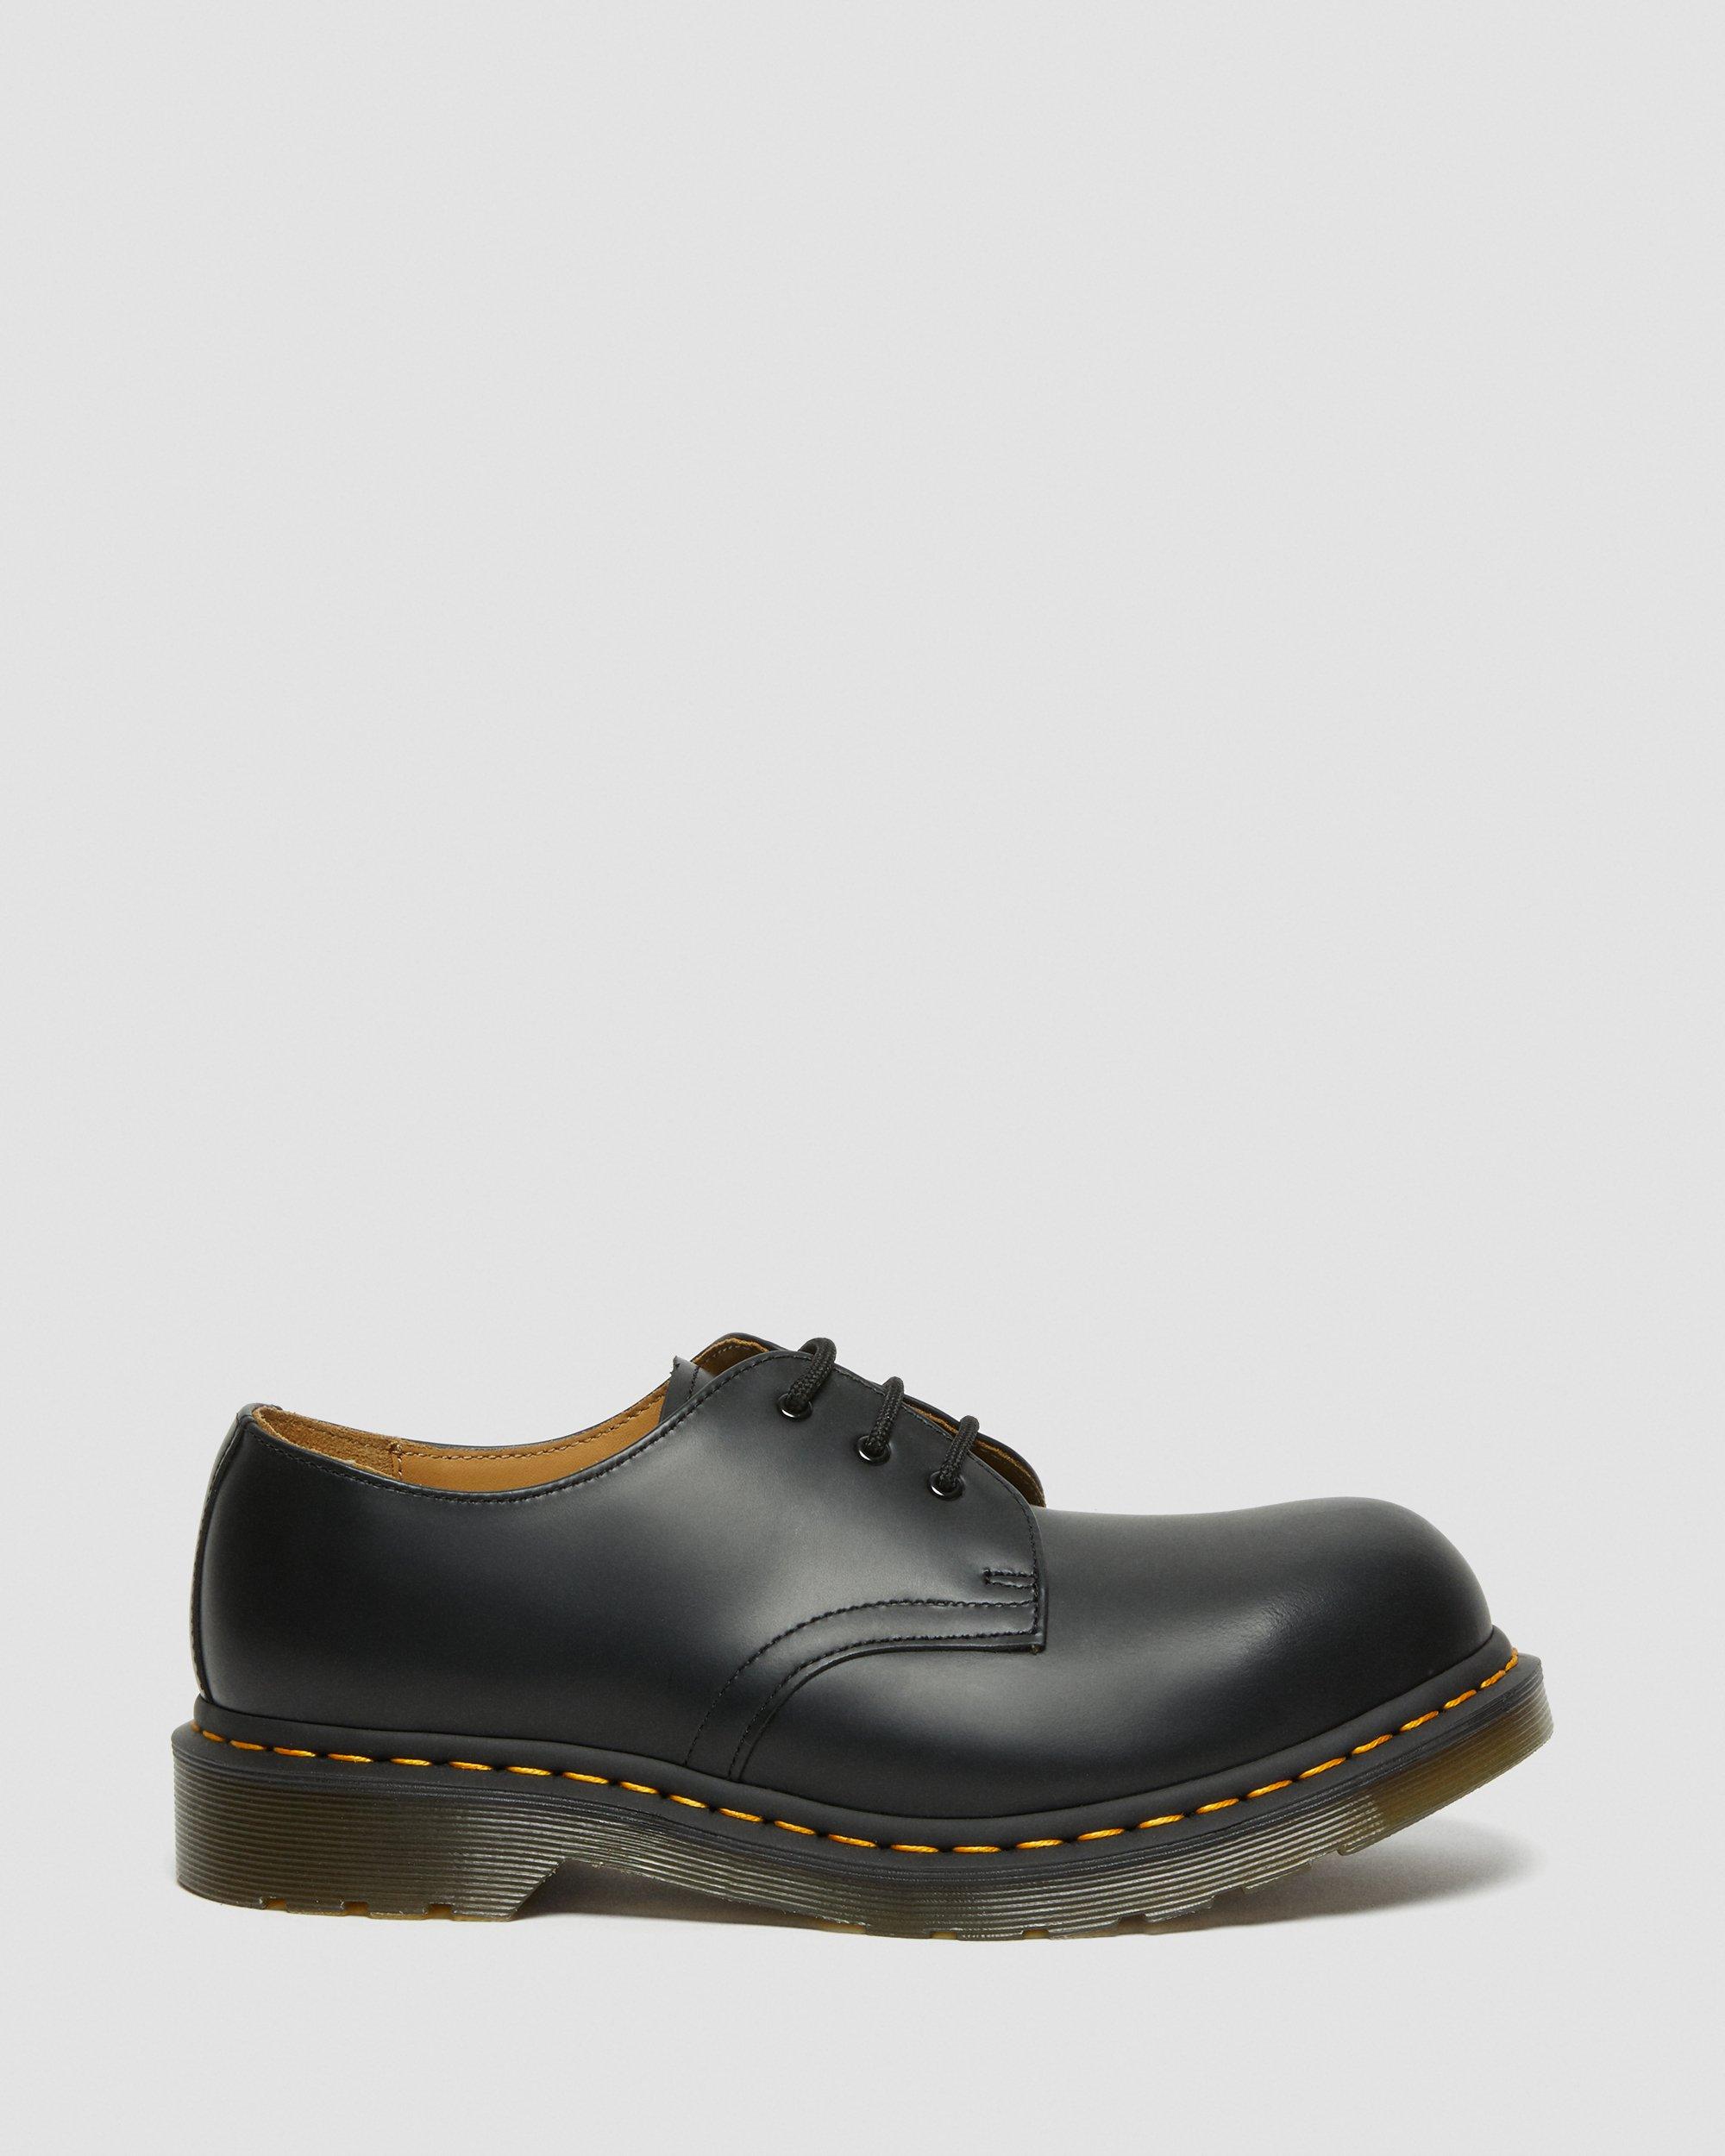 https://i1.adis.ws/i/drmartens/10111001.88.jpg?$large$1925 Leather Oxford Shoes Dr. Martens